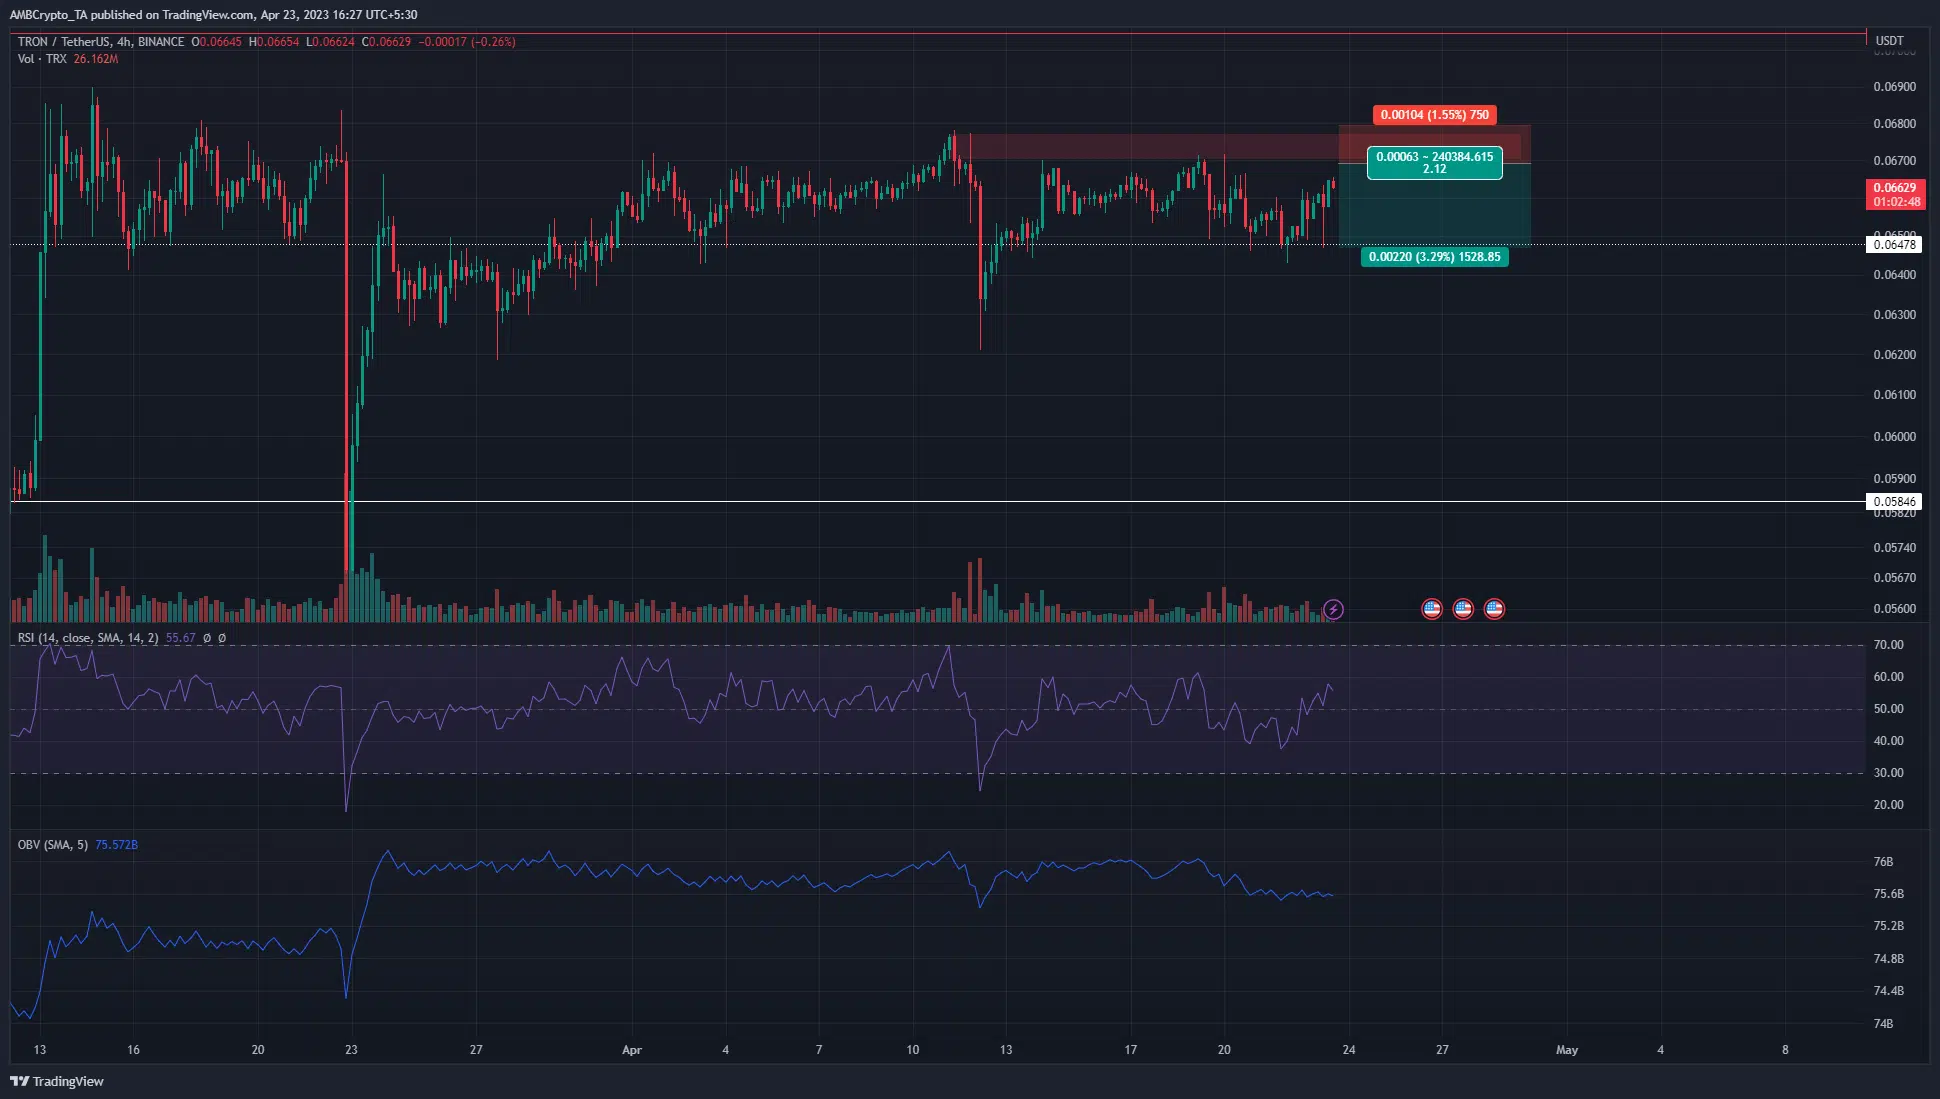 TRON [TRX] traders can watch out for a retest of this resistance